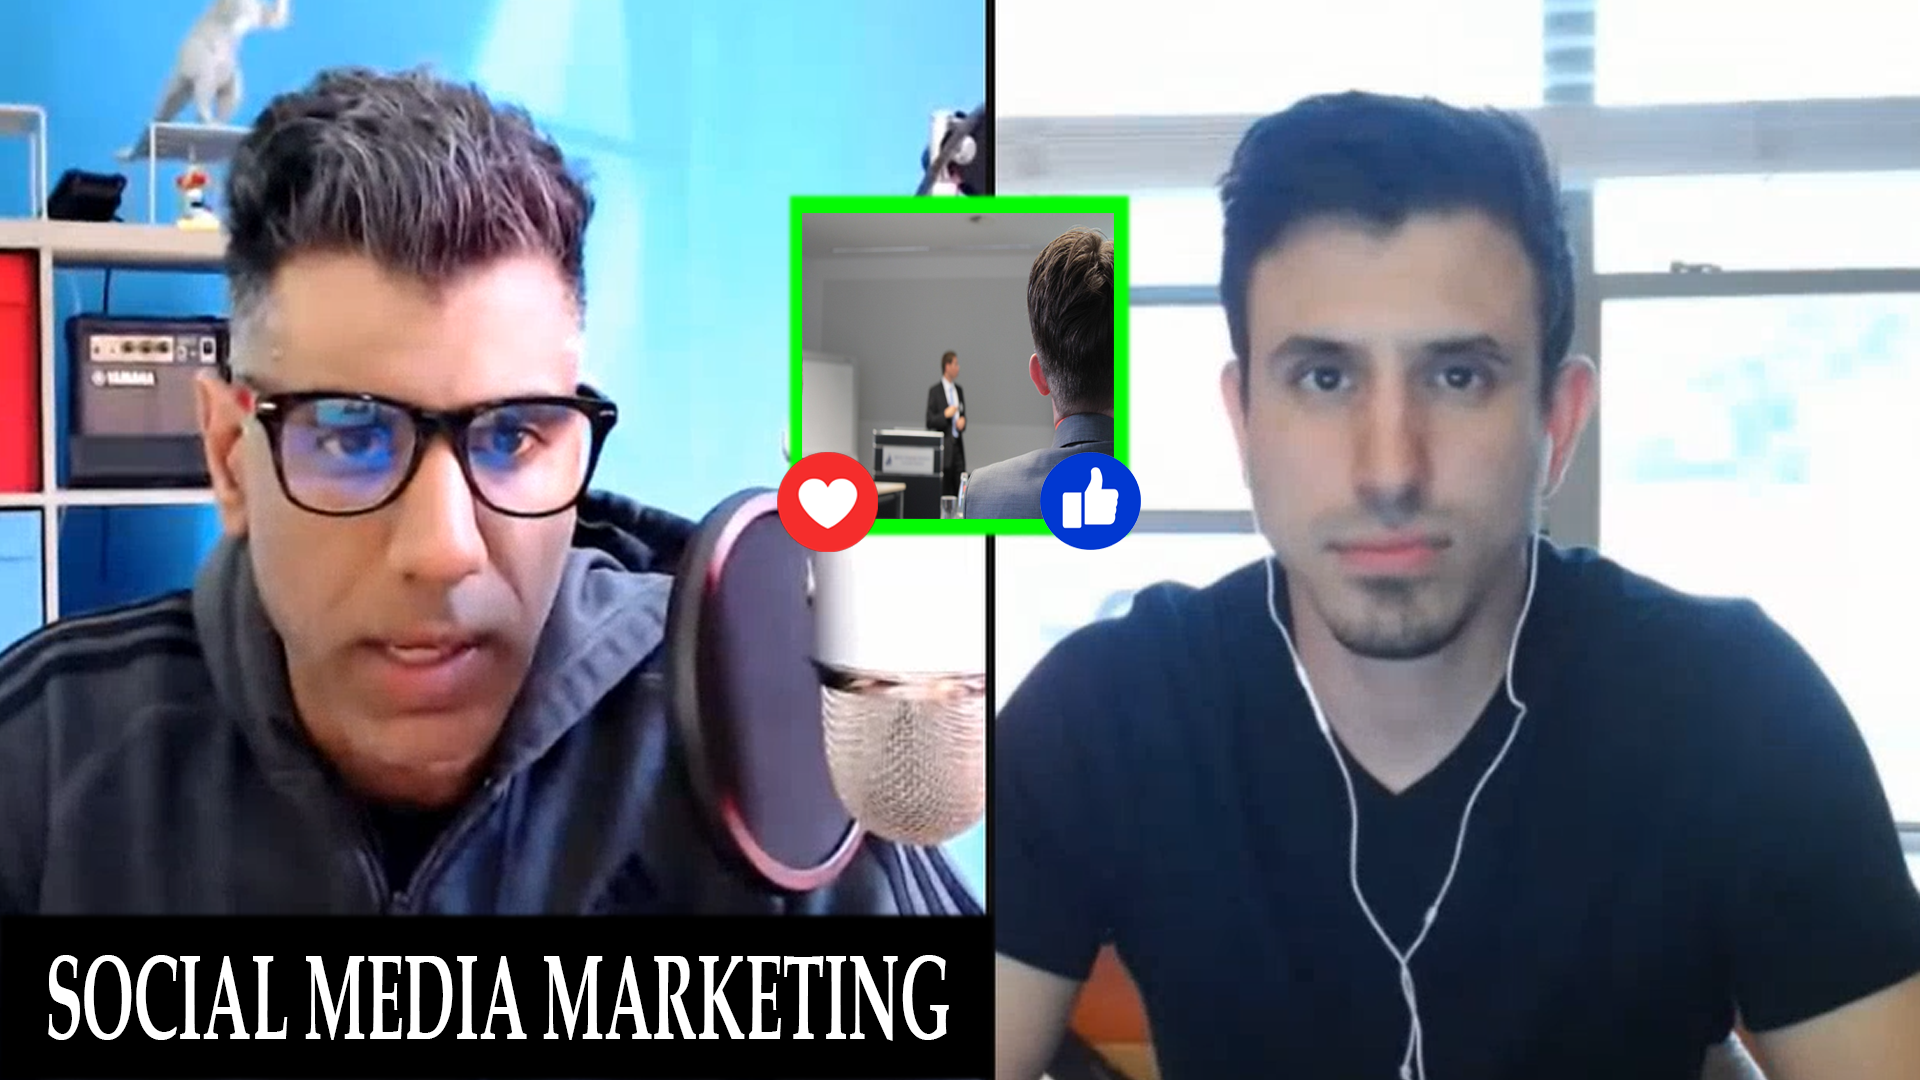 How to Grow a Social Media Marketing Agency with Video using Dubb